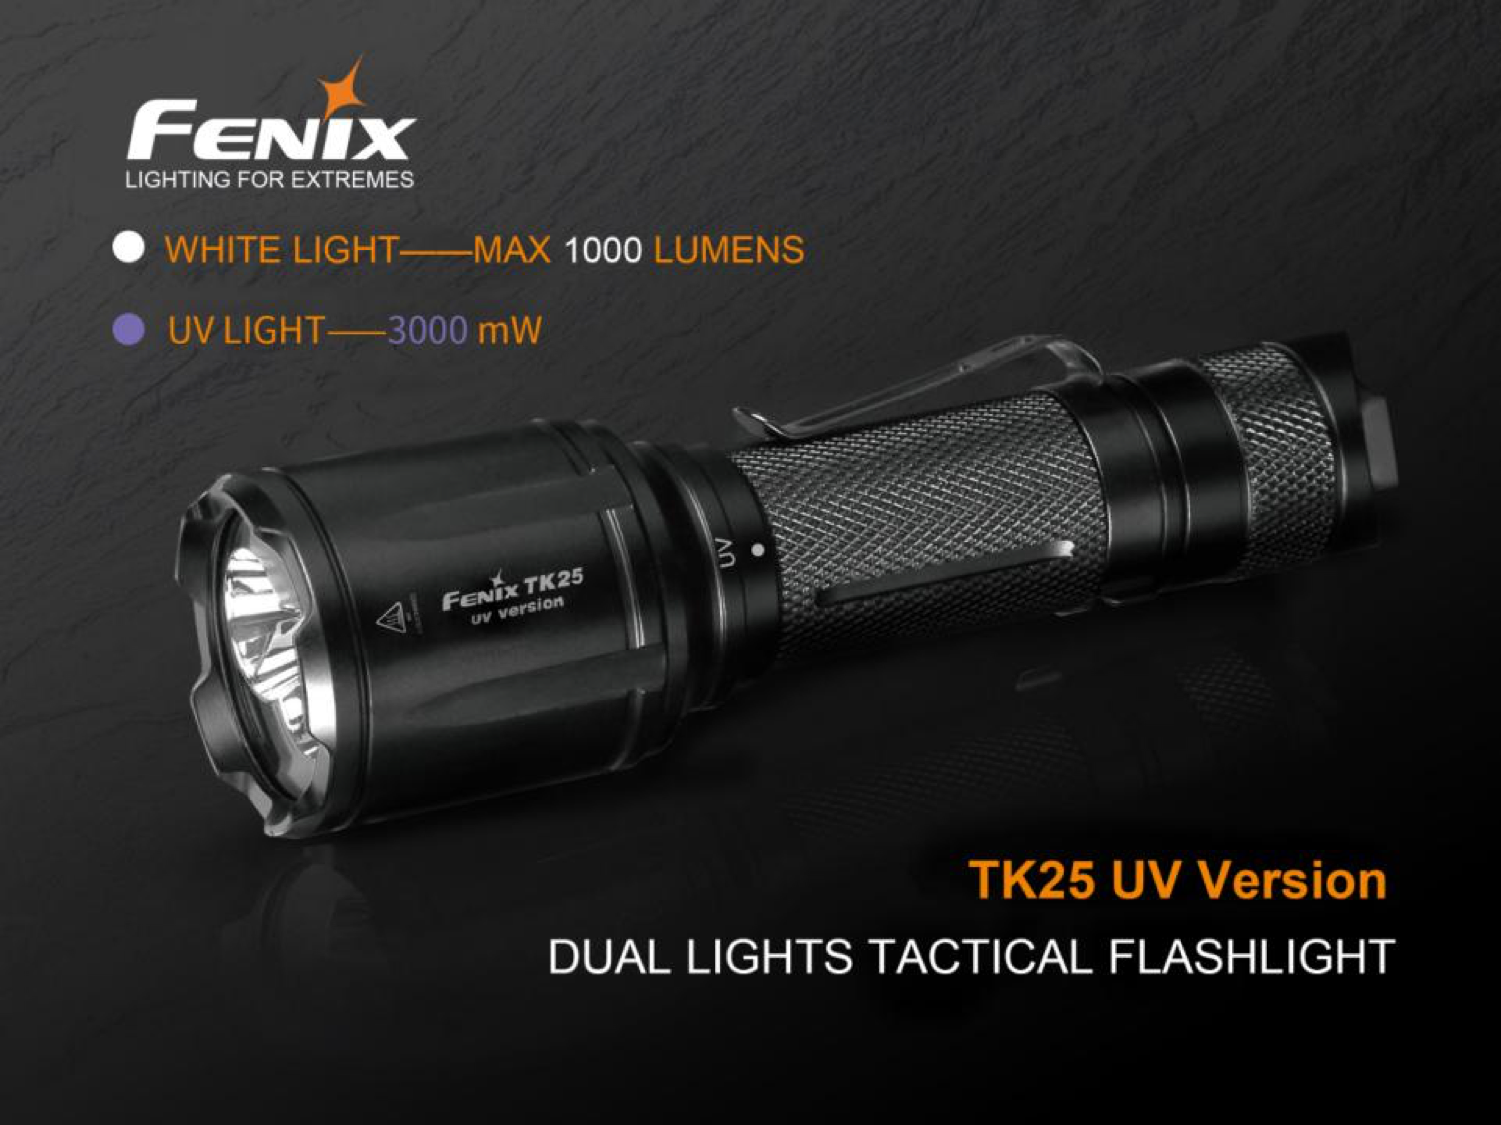 Fenix TK25UV LED Flashlight, UV Torch in India, White + Ultra Violet LEDs, Specially designed for Law enforcement policing department, One switch operation tactical LED Flashlight in India, Powerful LED Torch